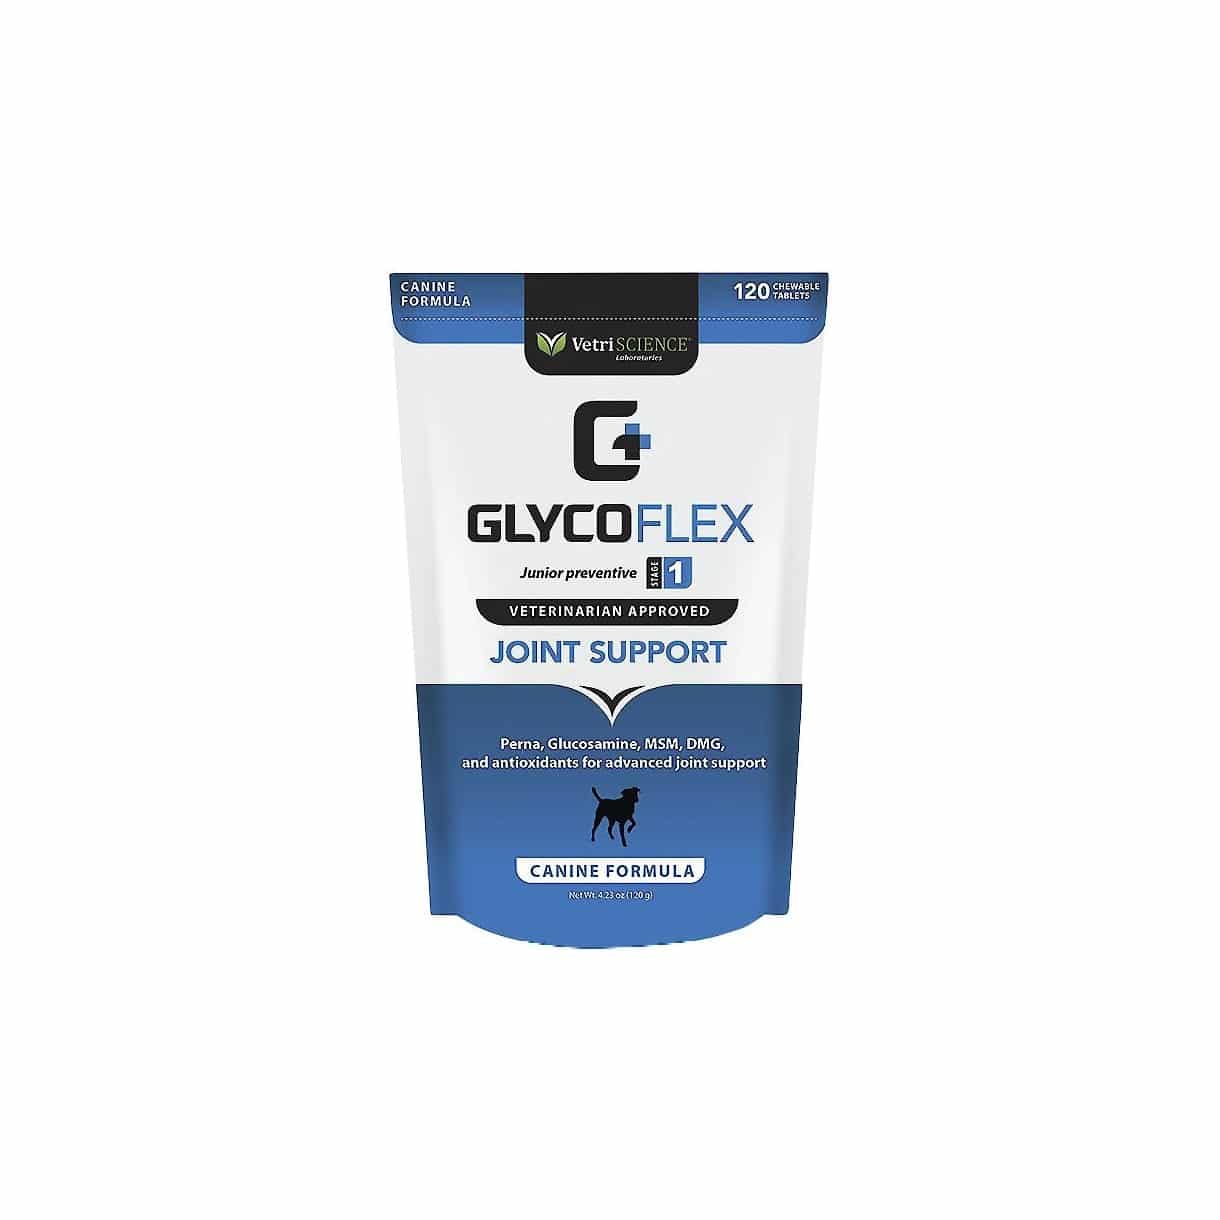 VetriScience GlycoFlex 1 Chicken Liver Flavored Soft Chews Joint Supplement for Dogs